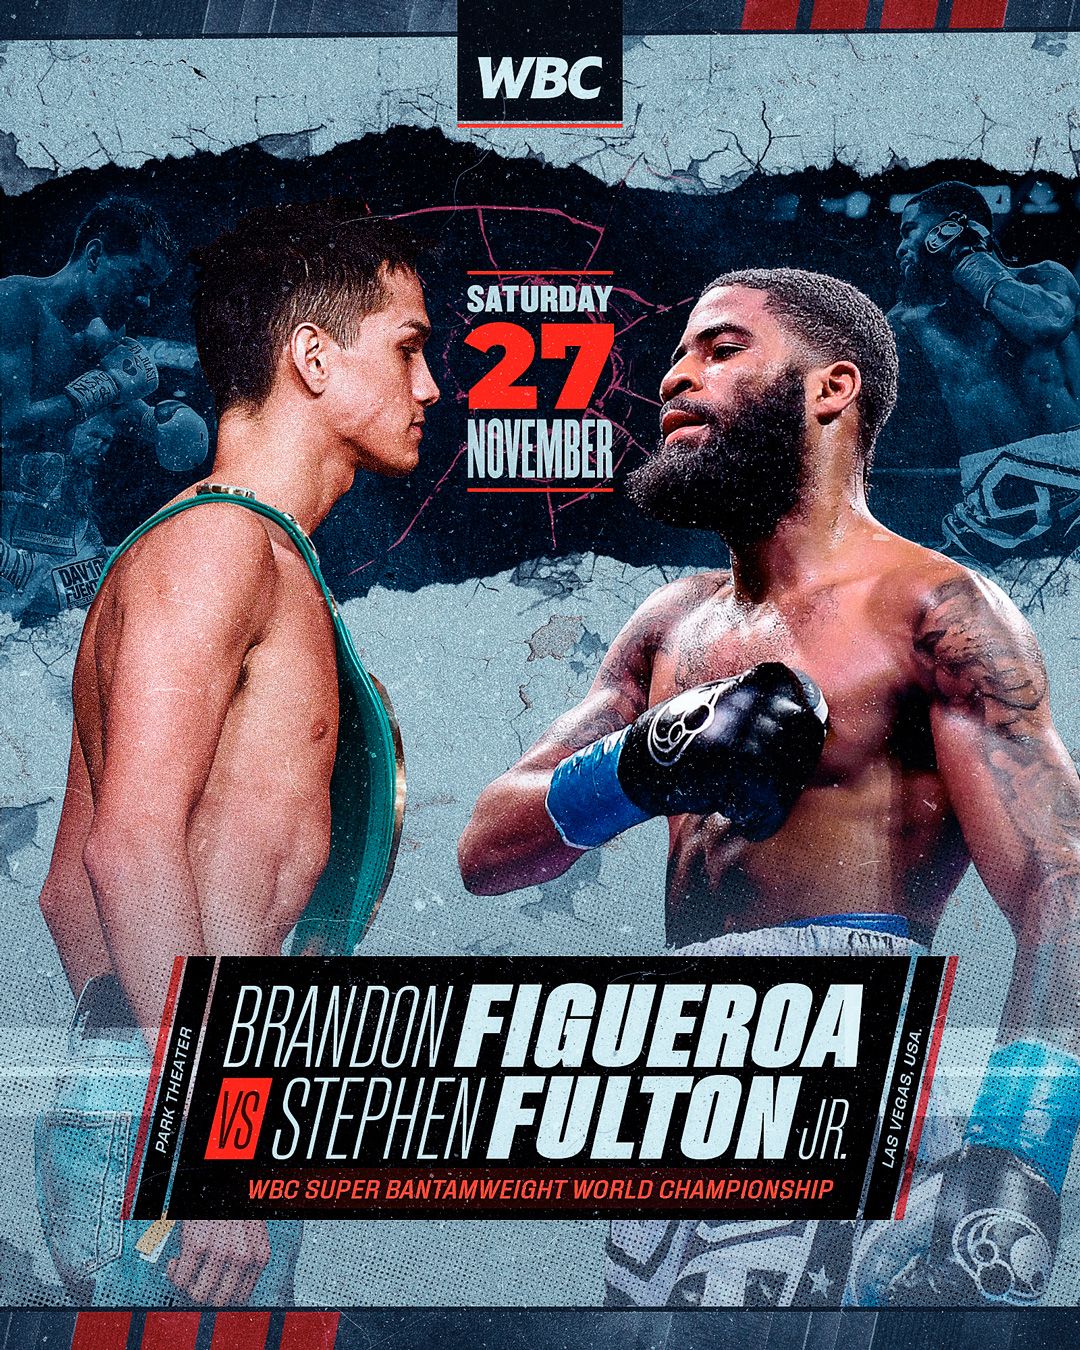 Triple glory on the line between Figueroa and Fulton + WBC Stats